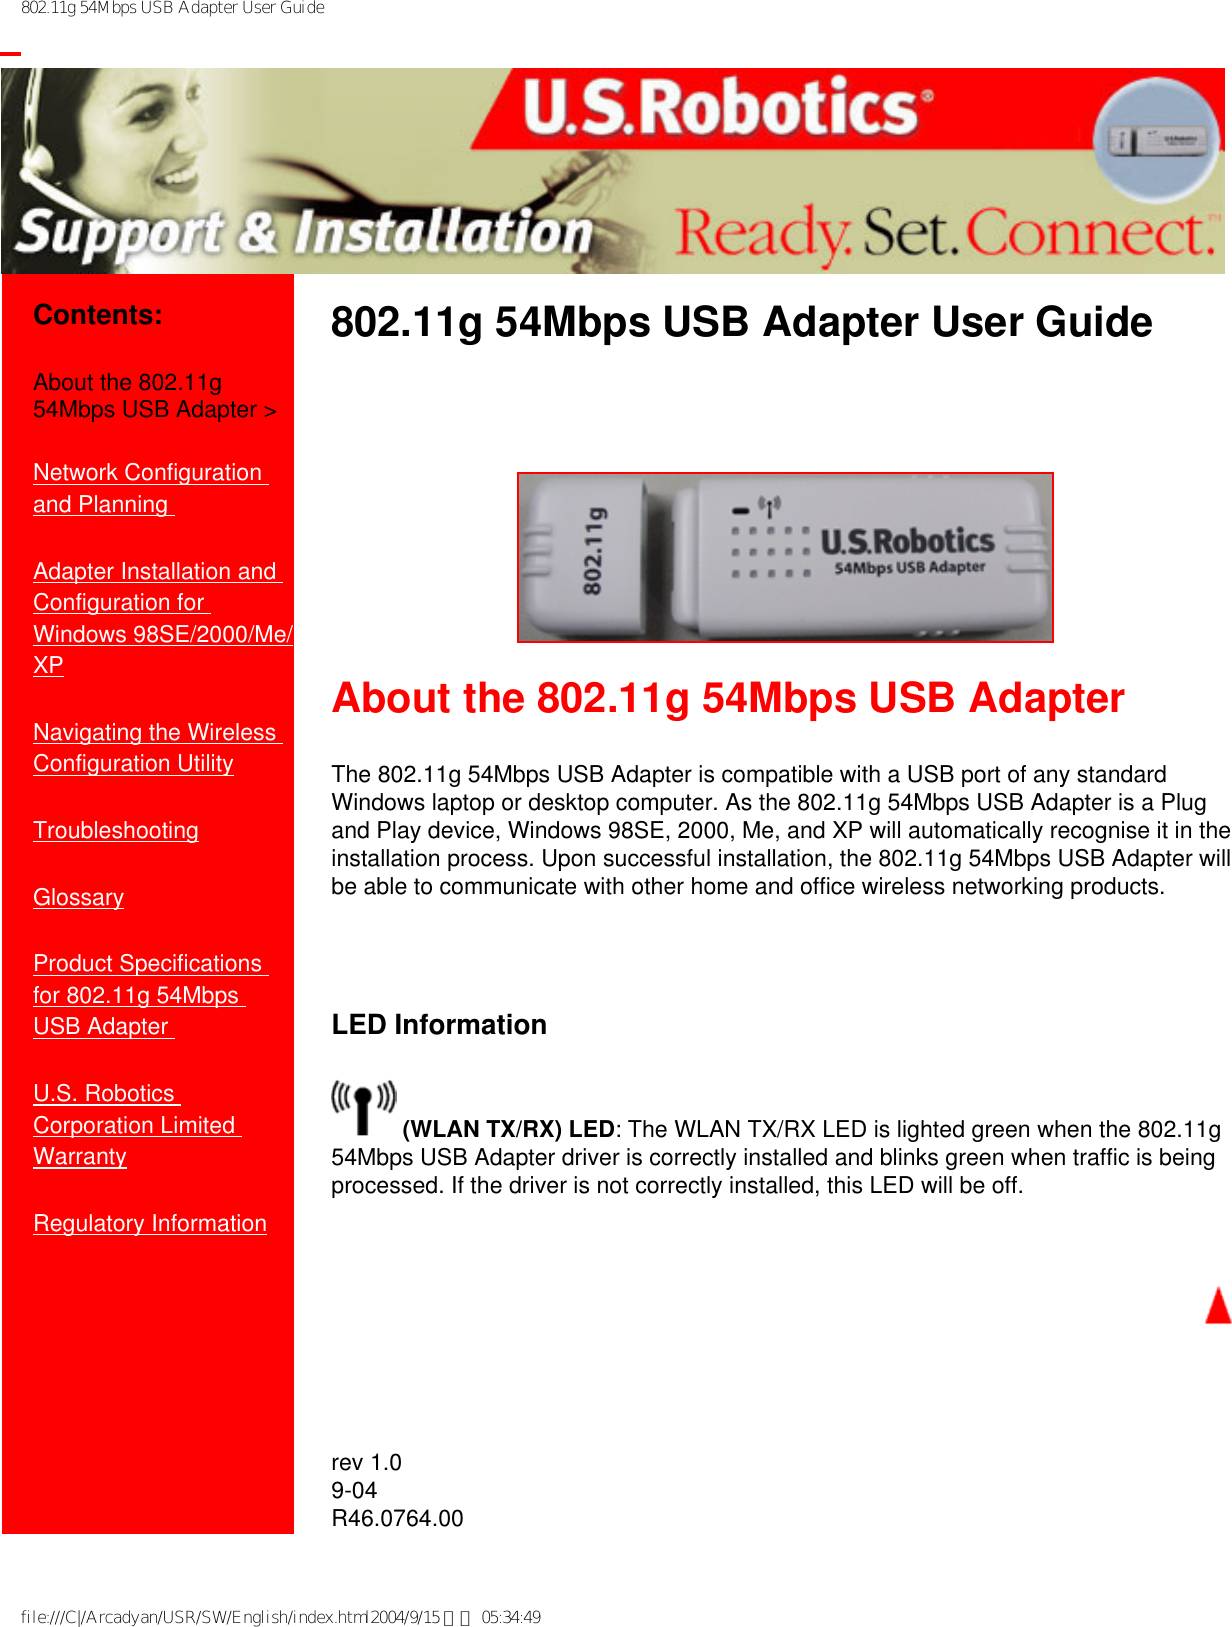 802.11g 54Mbps USB Adapter User Guide           Contents:About the 802.11g 54Mbps USB Adapter &gt;Network Configuration and Planning Adapter Installation and Configuration for Windows 98SE/2000/Me/XPNavigating the Wireless Configuration UtilityTroubleshooting Glossary Product Specifications for 802.11g 54Mbps USB Adapter U.S. Robotics Corporation Limited Warranty Regulatory Information802.11g 54Mbps USB Adapter User Guide  About the 802.11g 54Mbps USB AdapterThe 802.11g 54Mbps USB Adapter is compatible with a USB port of any standard Windows laptop or desktop computer. As the 802.11g 54Mbps USB Adapter is a Plug and Play device, Windows 98SE, 2000, Me, and XP will automatically recognise it in the installation process. Upon successful installation, the 802.11g 54Mbps USB Adapter will be able to communicate with other home and office wireless networking products.   LED Information (WLAN TX/RX) LED: The WLAN TX/RX LED is lighted green when the 802.11g 54Mbps USB Adapter driver is correctly installed and blinks green when traffic is being processed. If the driver is not correctly installed, this LED will be off.   rev 1.09-04R46.0764.00 file:///C|/Arcadyan/USR/SW/English/index.html2004/9/15 下午 05:34:49